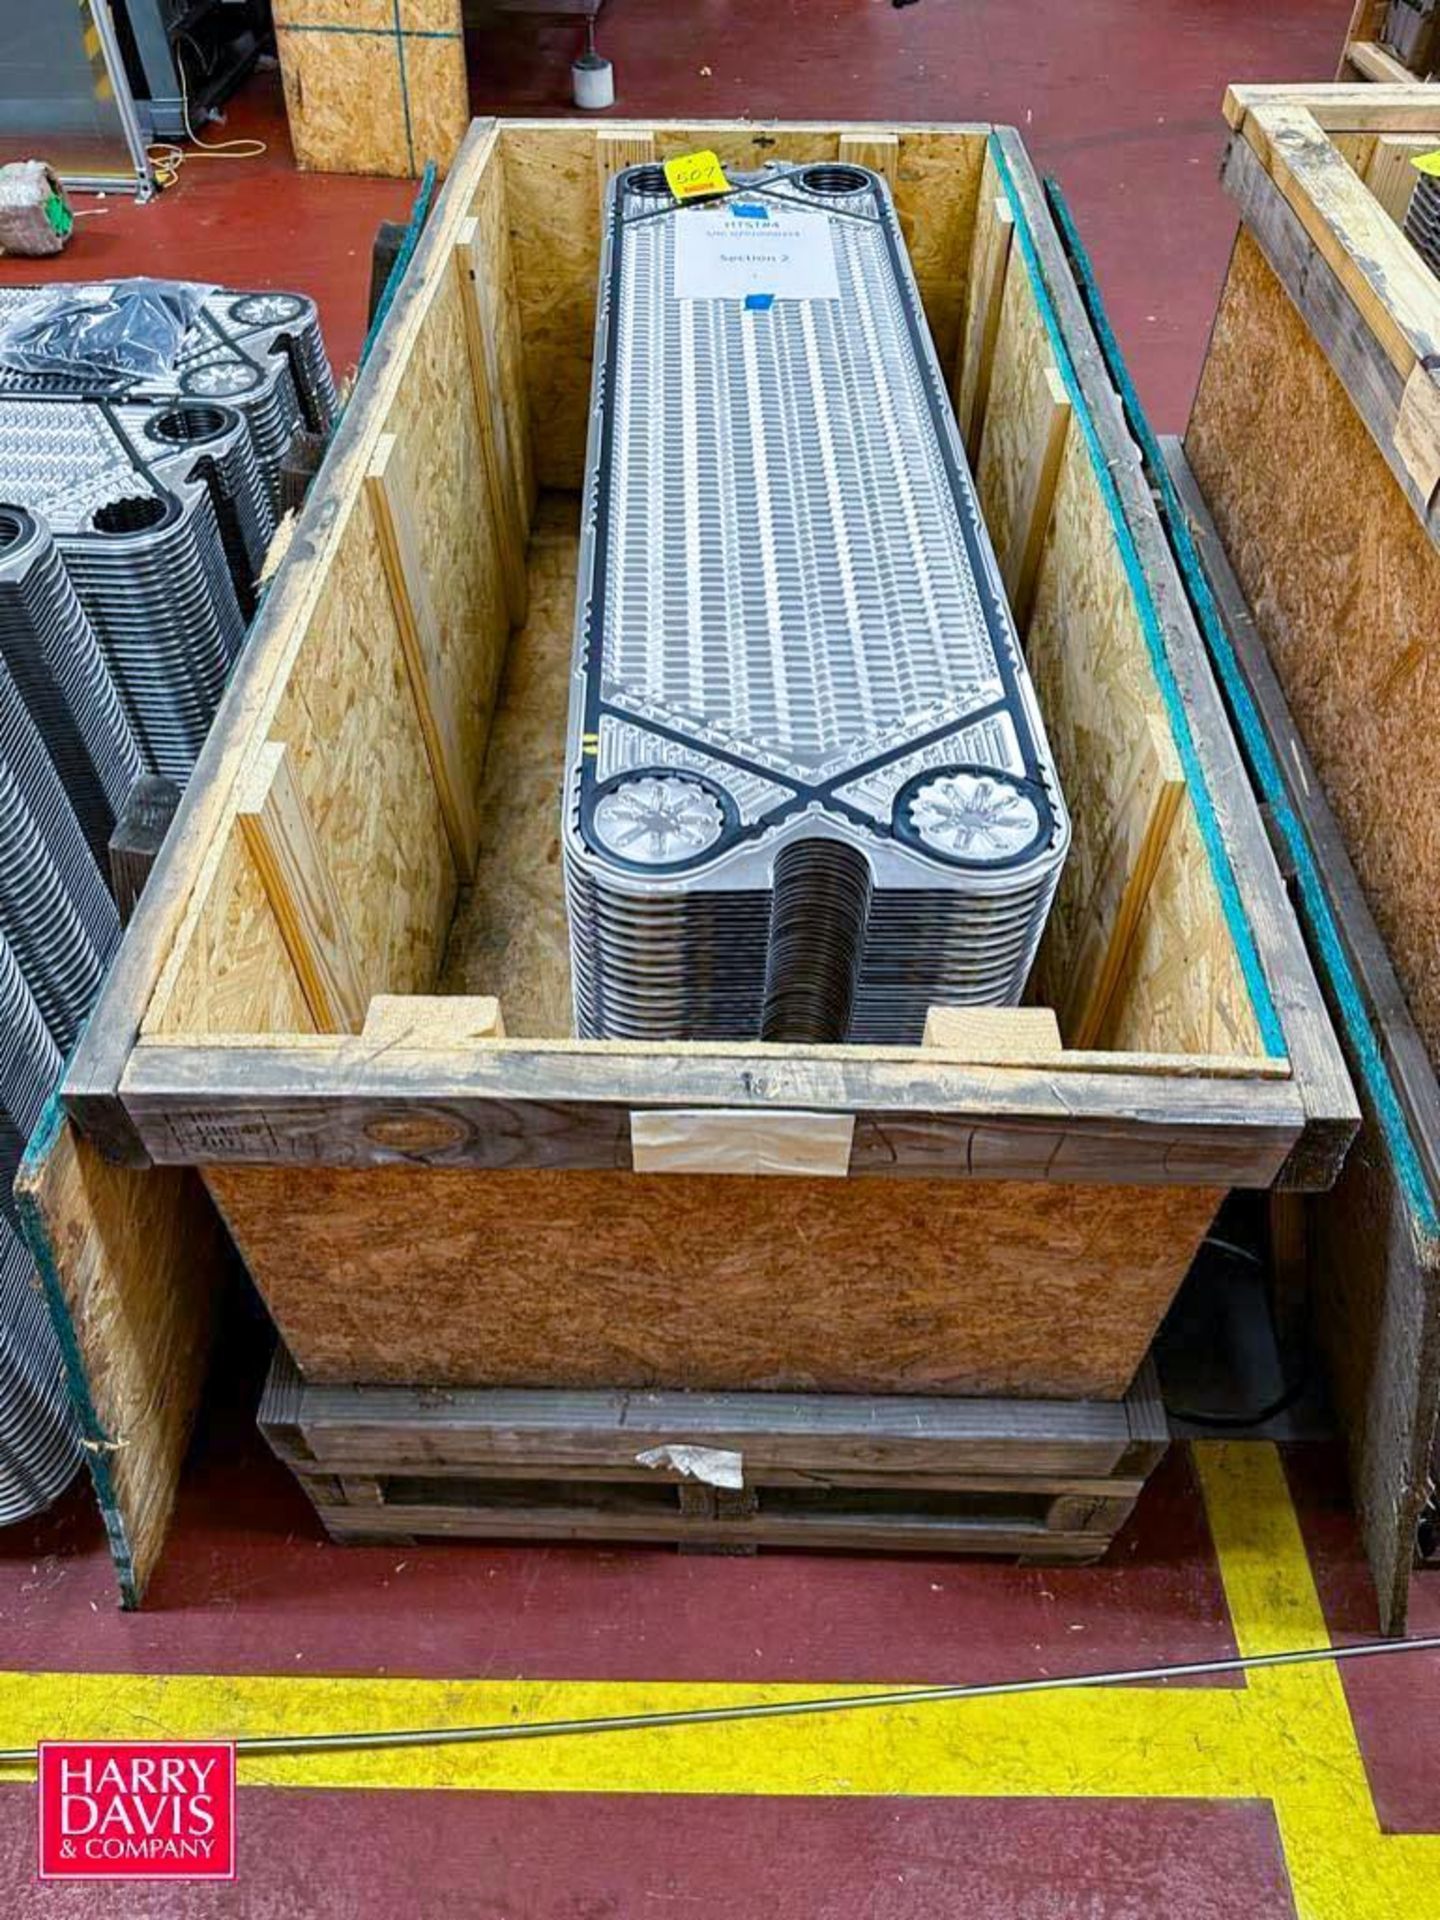 S/S Plate Heat Exchanger Plates - Rigging Fee: $100